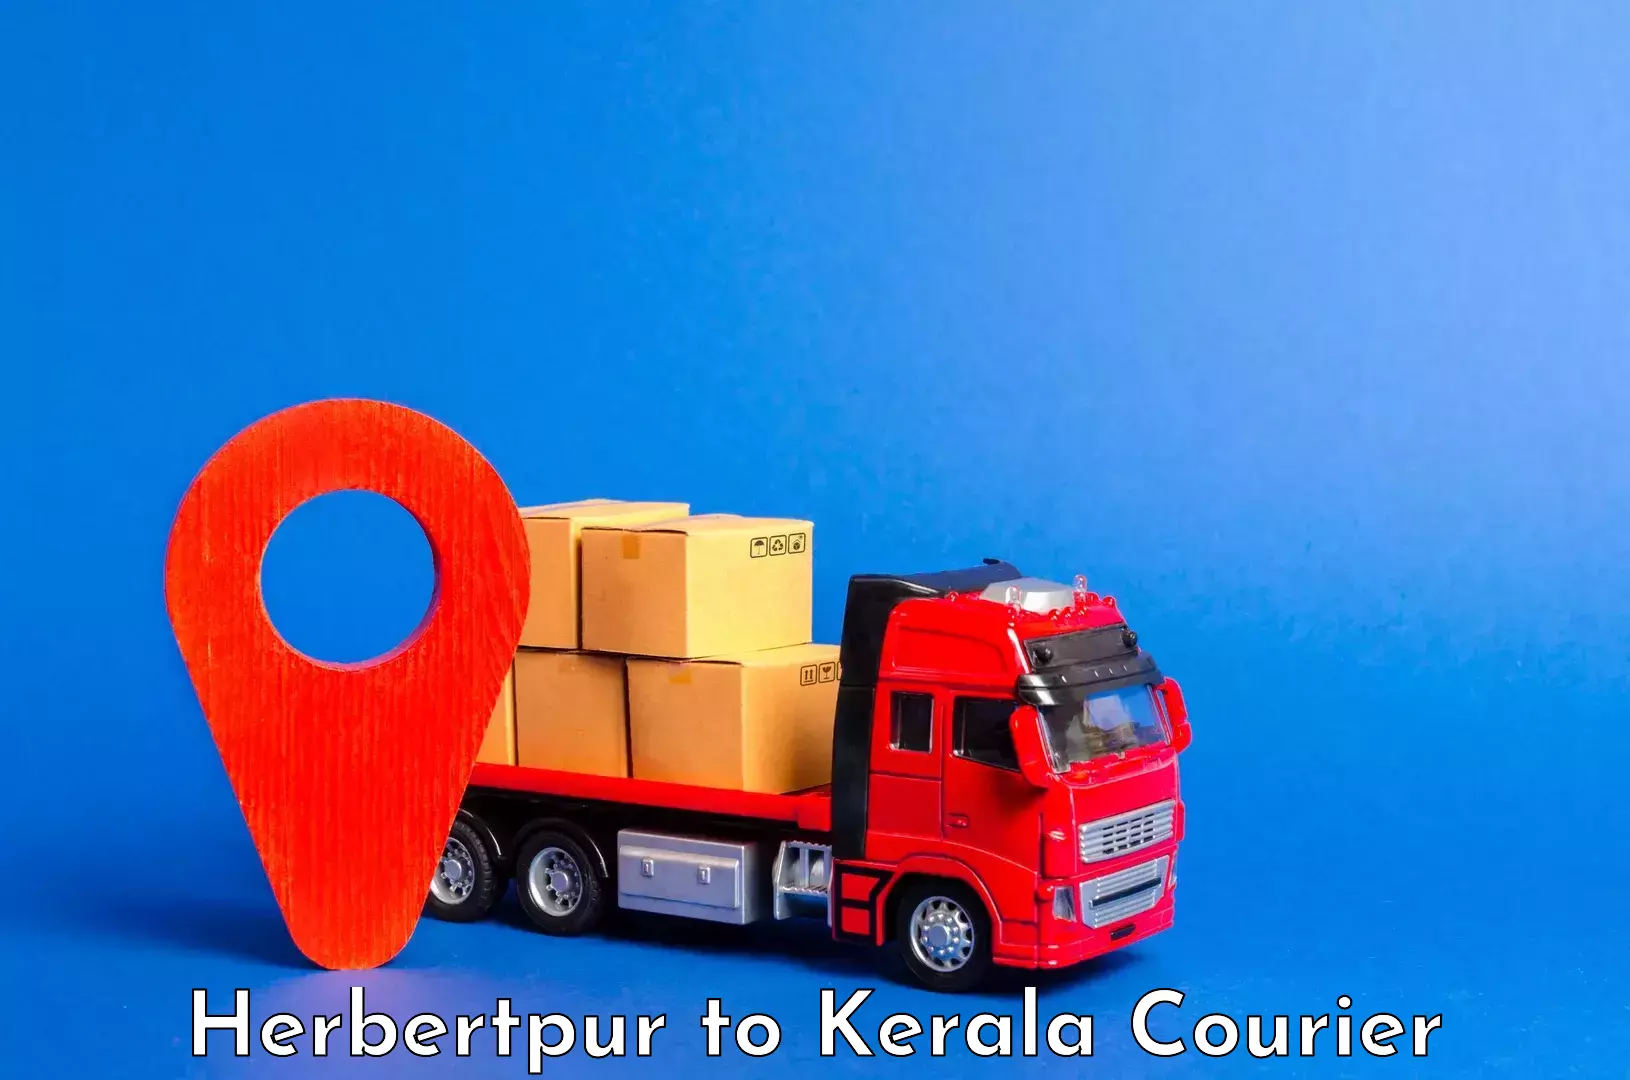 Same day luggage service in Herbertpur to Alappuzha